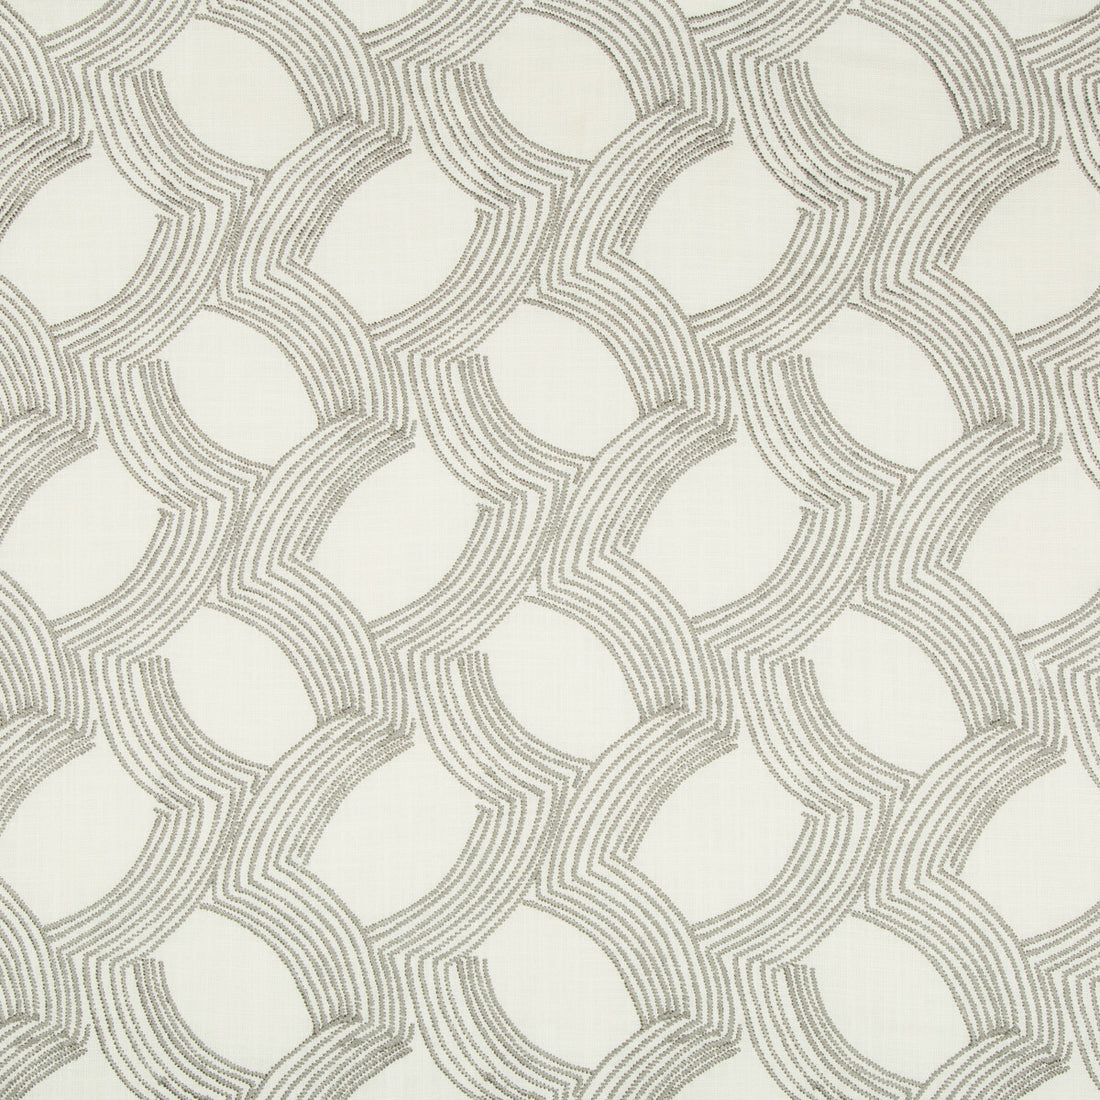 Whyknot fabric in dove color - pattern 34858.11.0 - by Kravet Design in the Thom Filicia Altitude collection